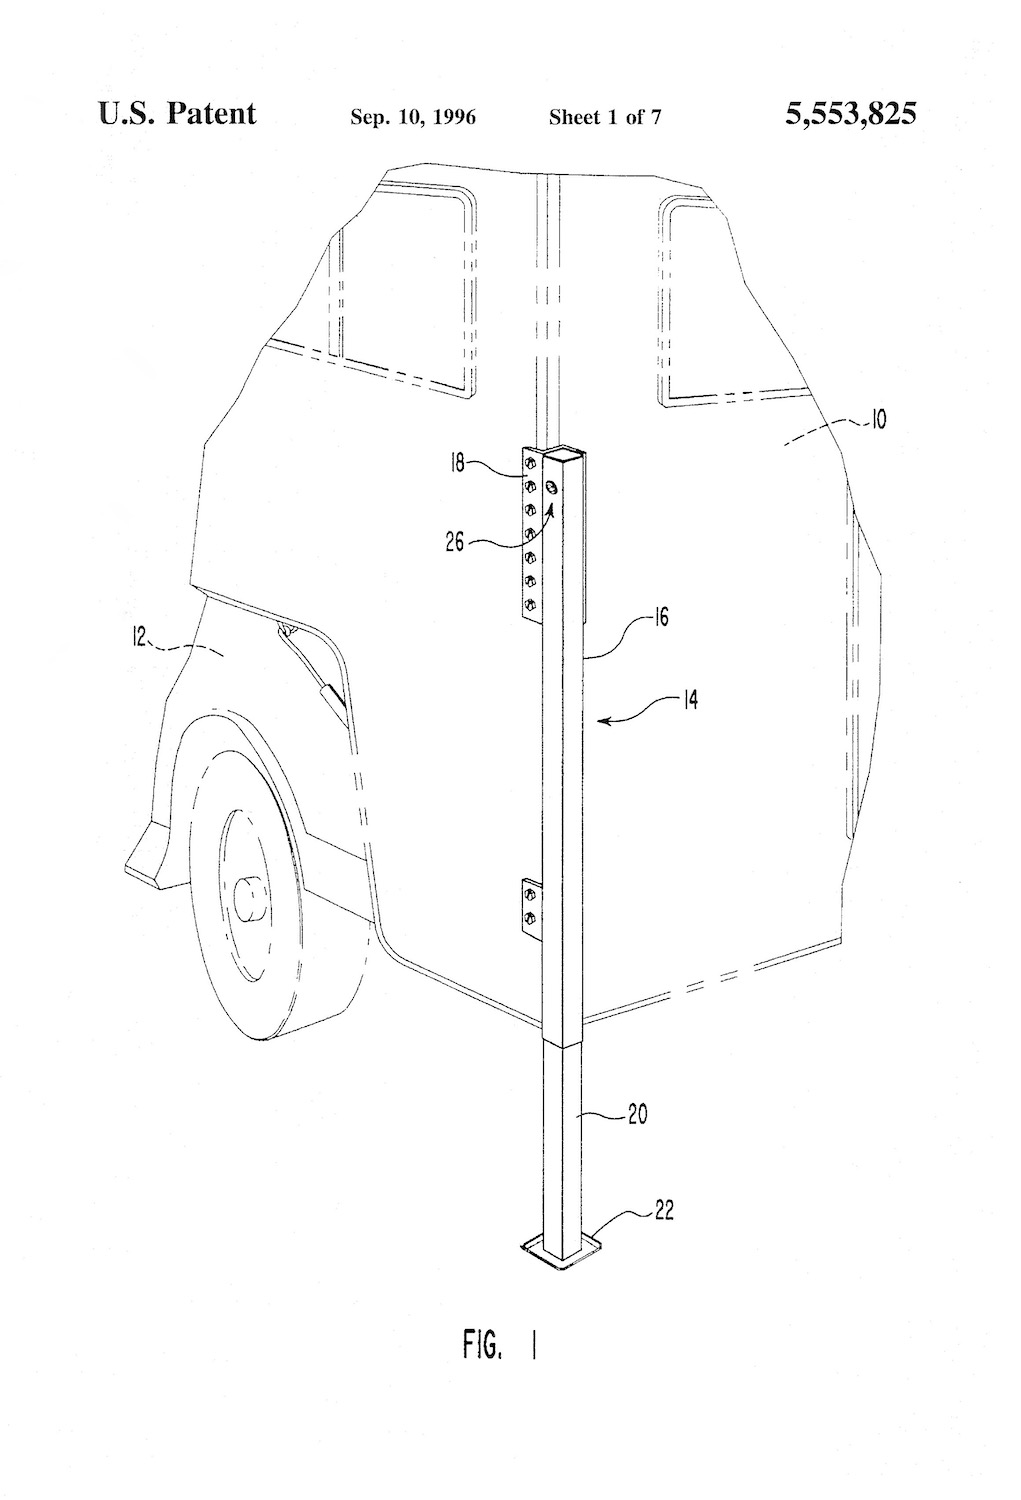 Diagram of a jack mounted to a truck camper from Patent US5553825A